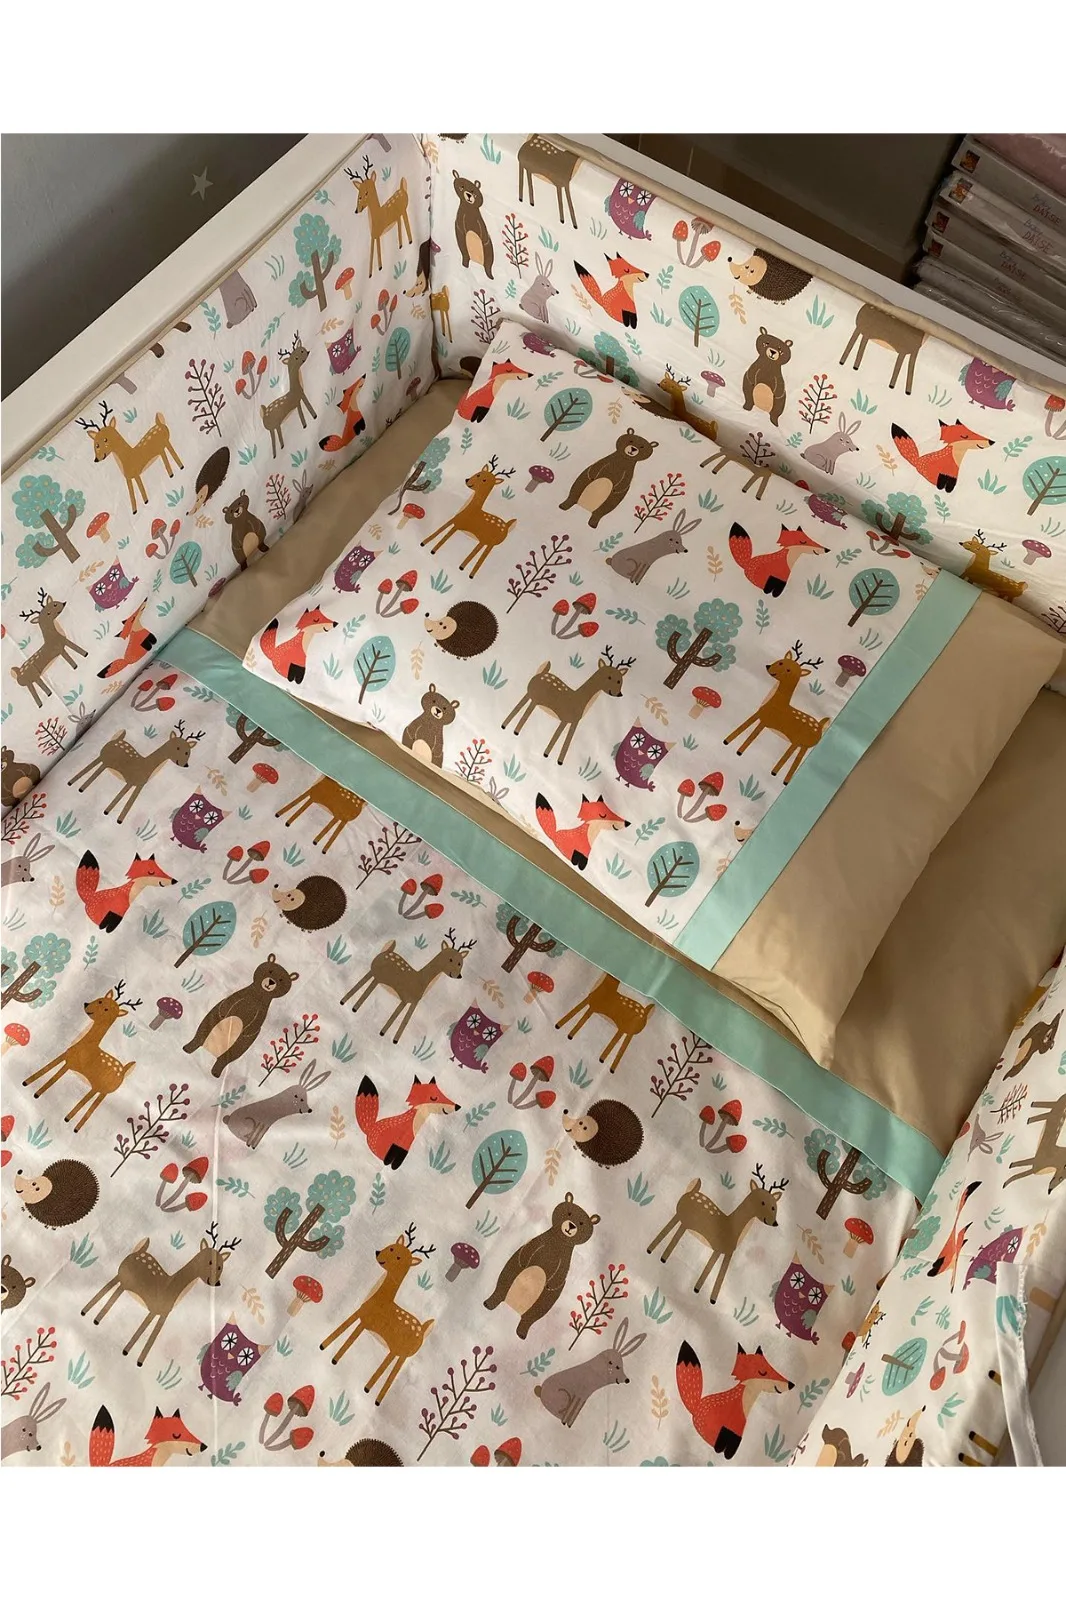 Jaju Baby Handmade, Cute Forest Pattern and Brown Combined Baby Duvet Cover Set and Edge Protection, Baby Bed Sheet